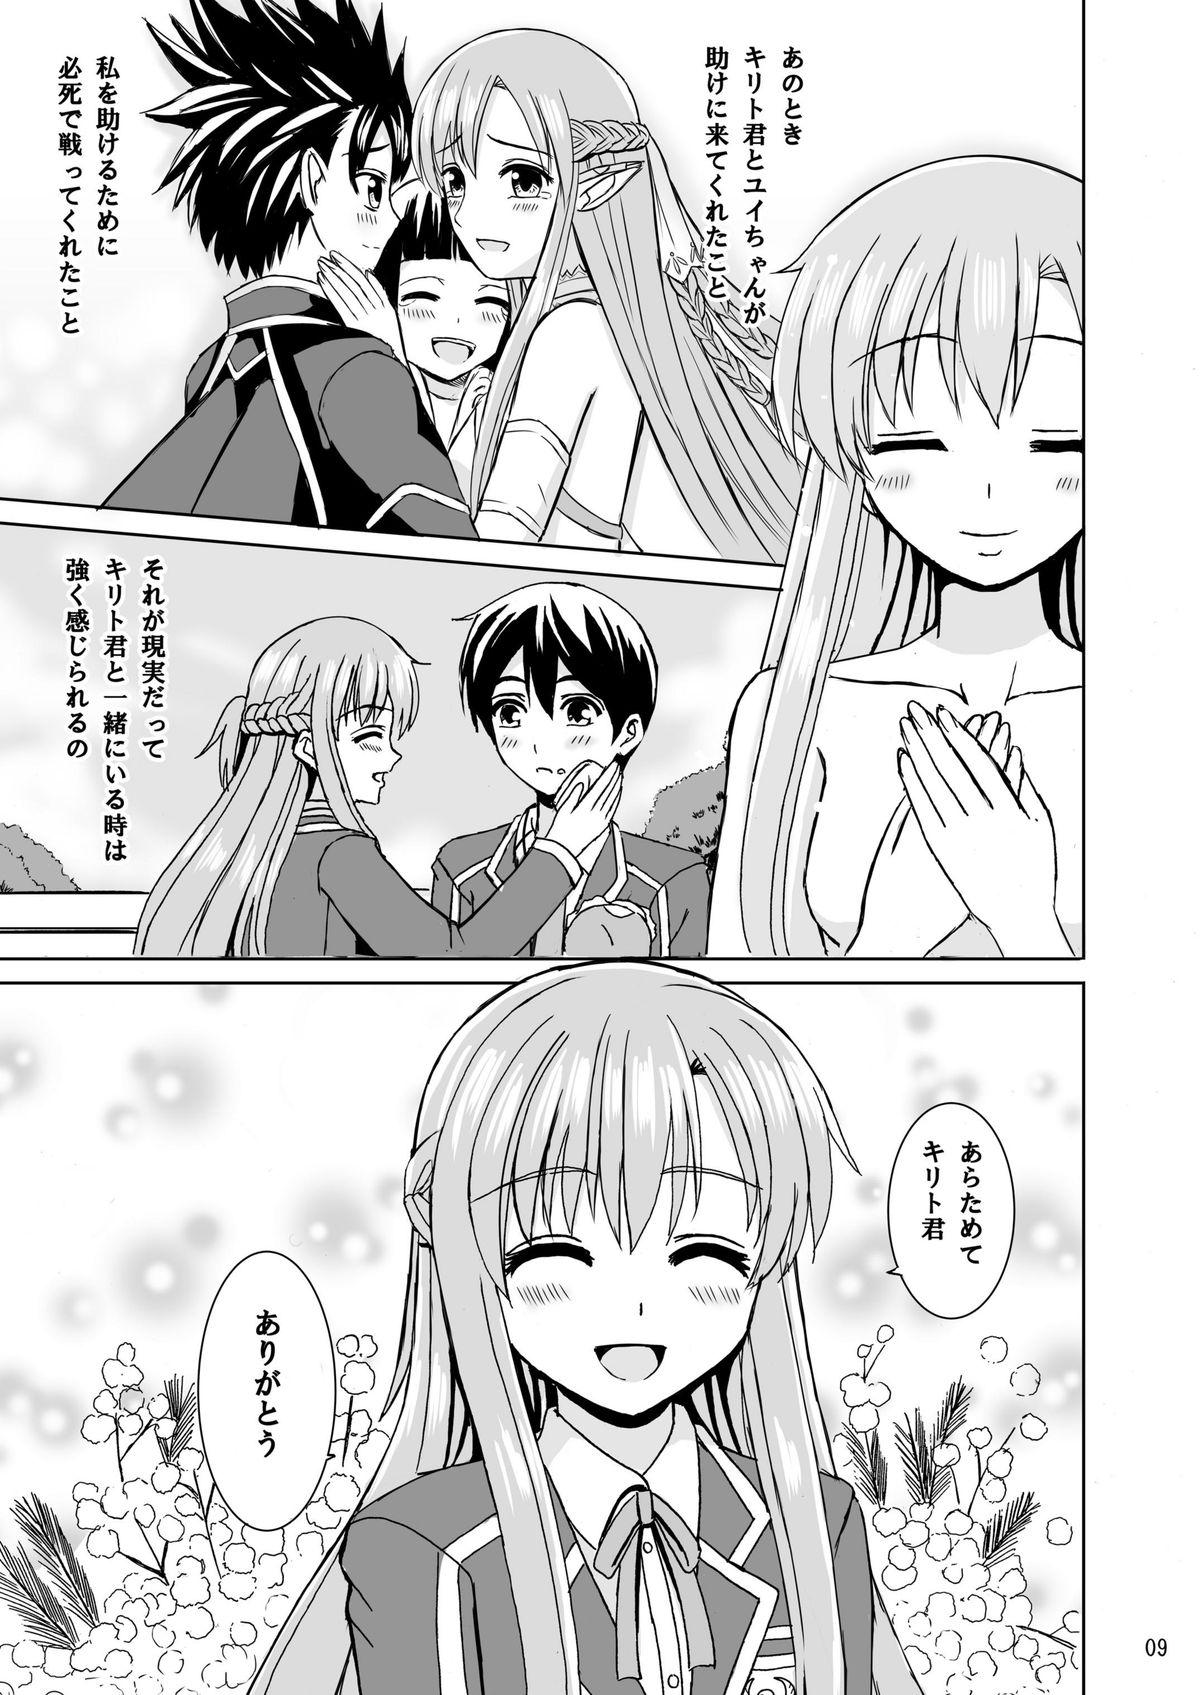 Gay Physicals Zutto Kimi to Issho ni - Sword art online Grandmother - Page 9